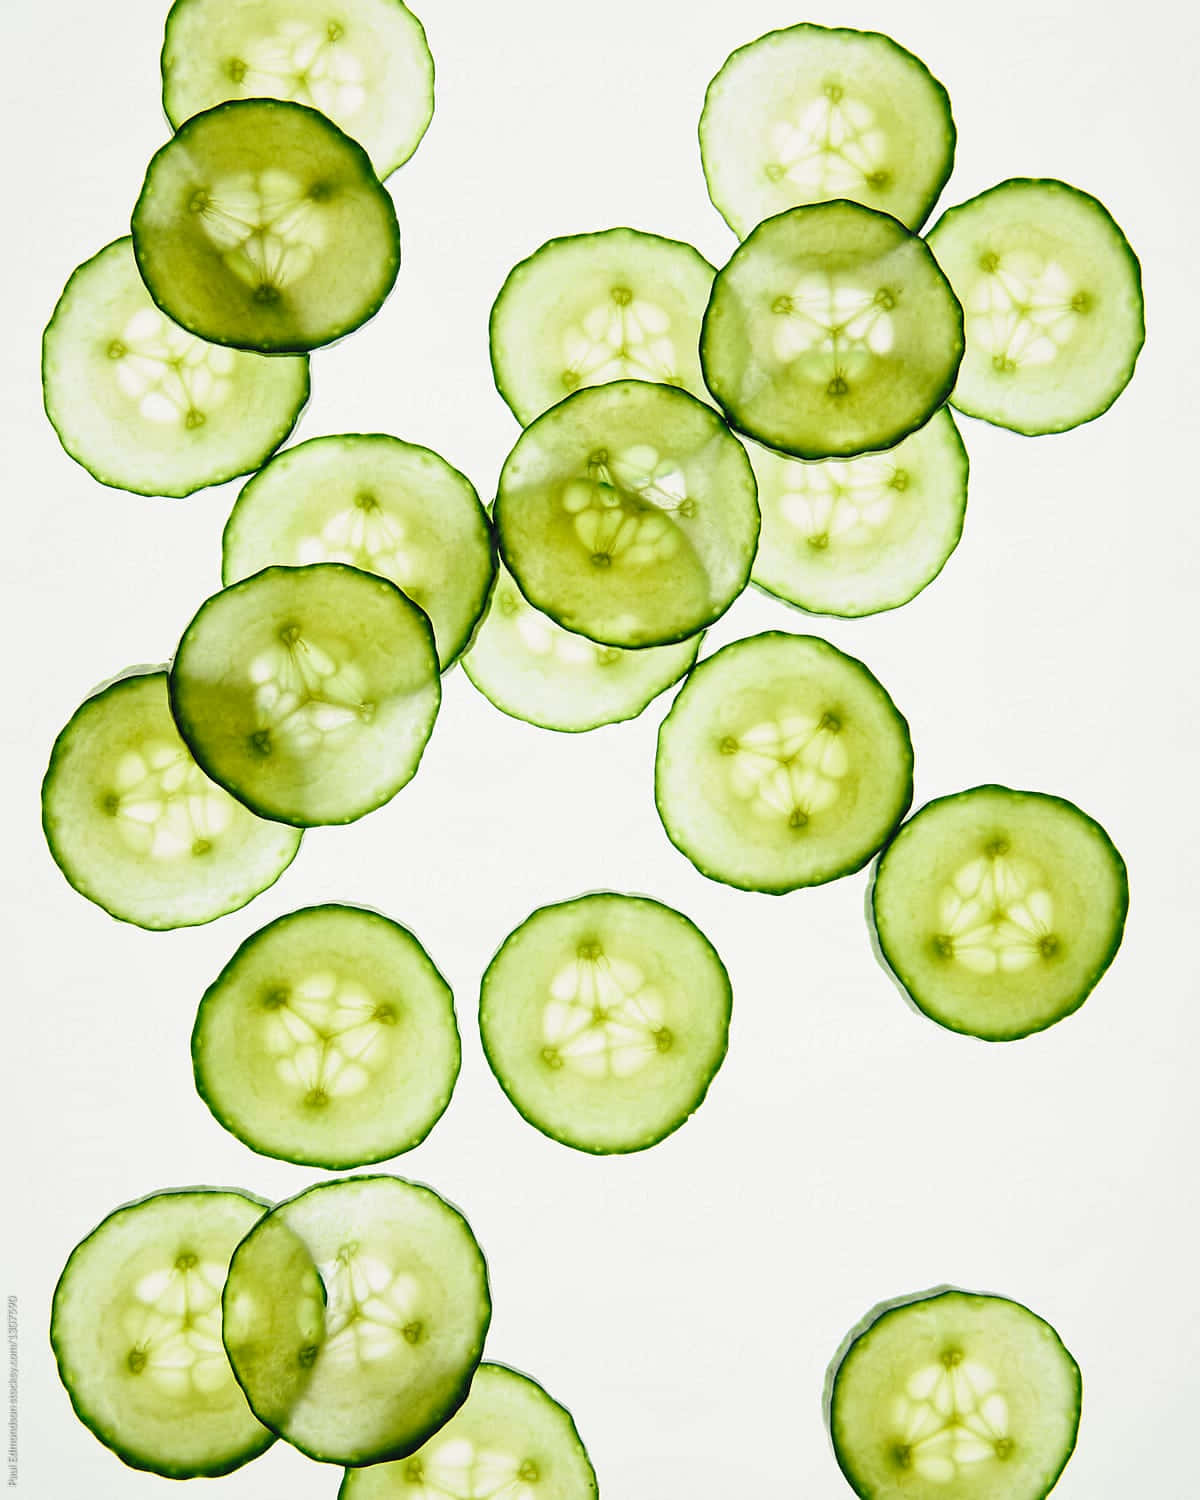 Cucumber Slices On A White Background